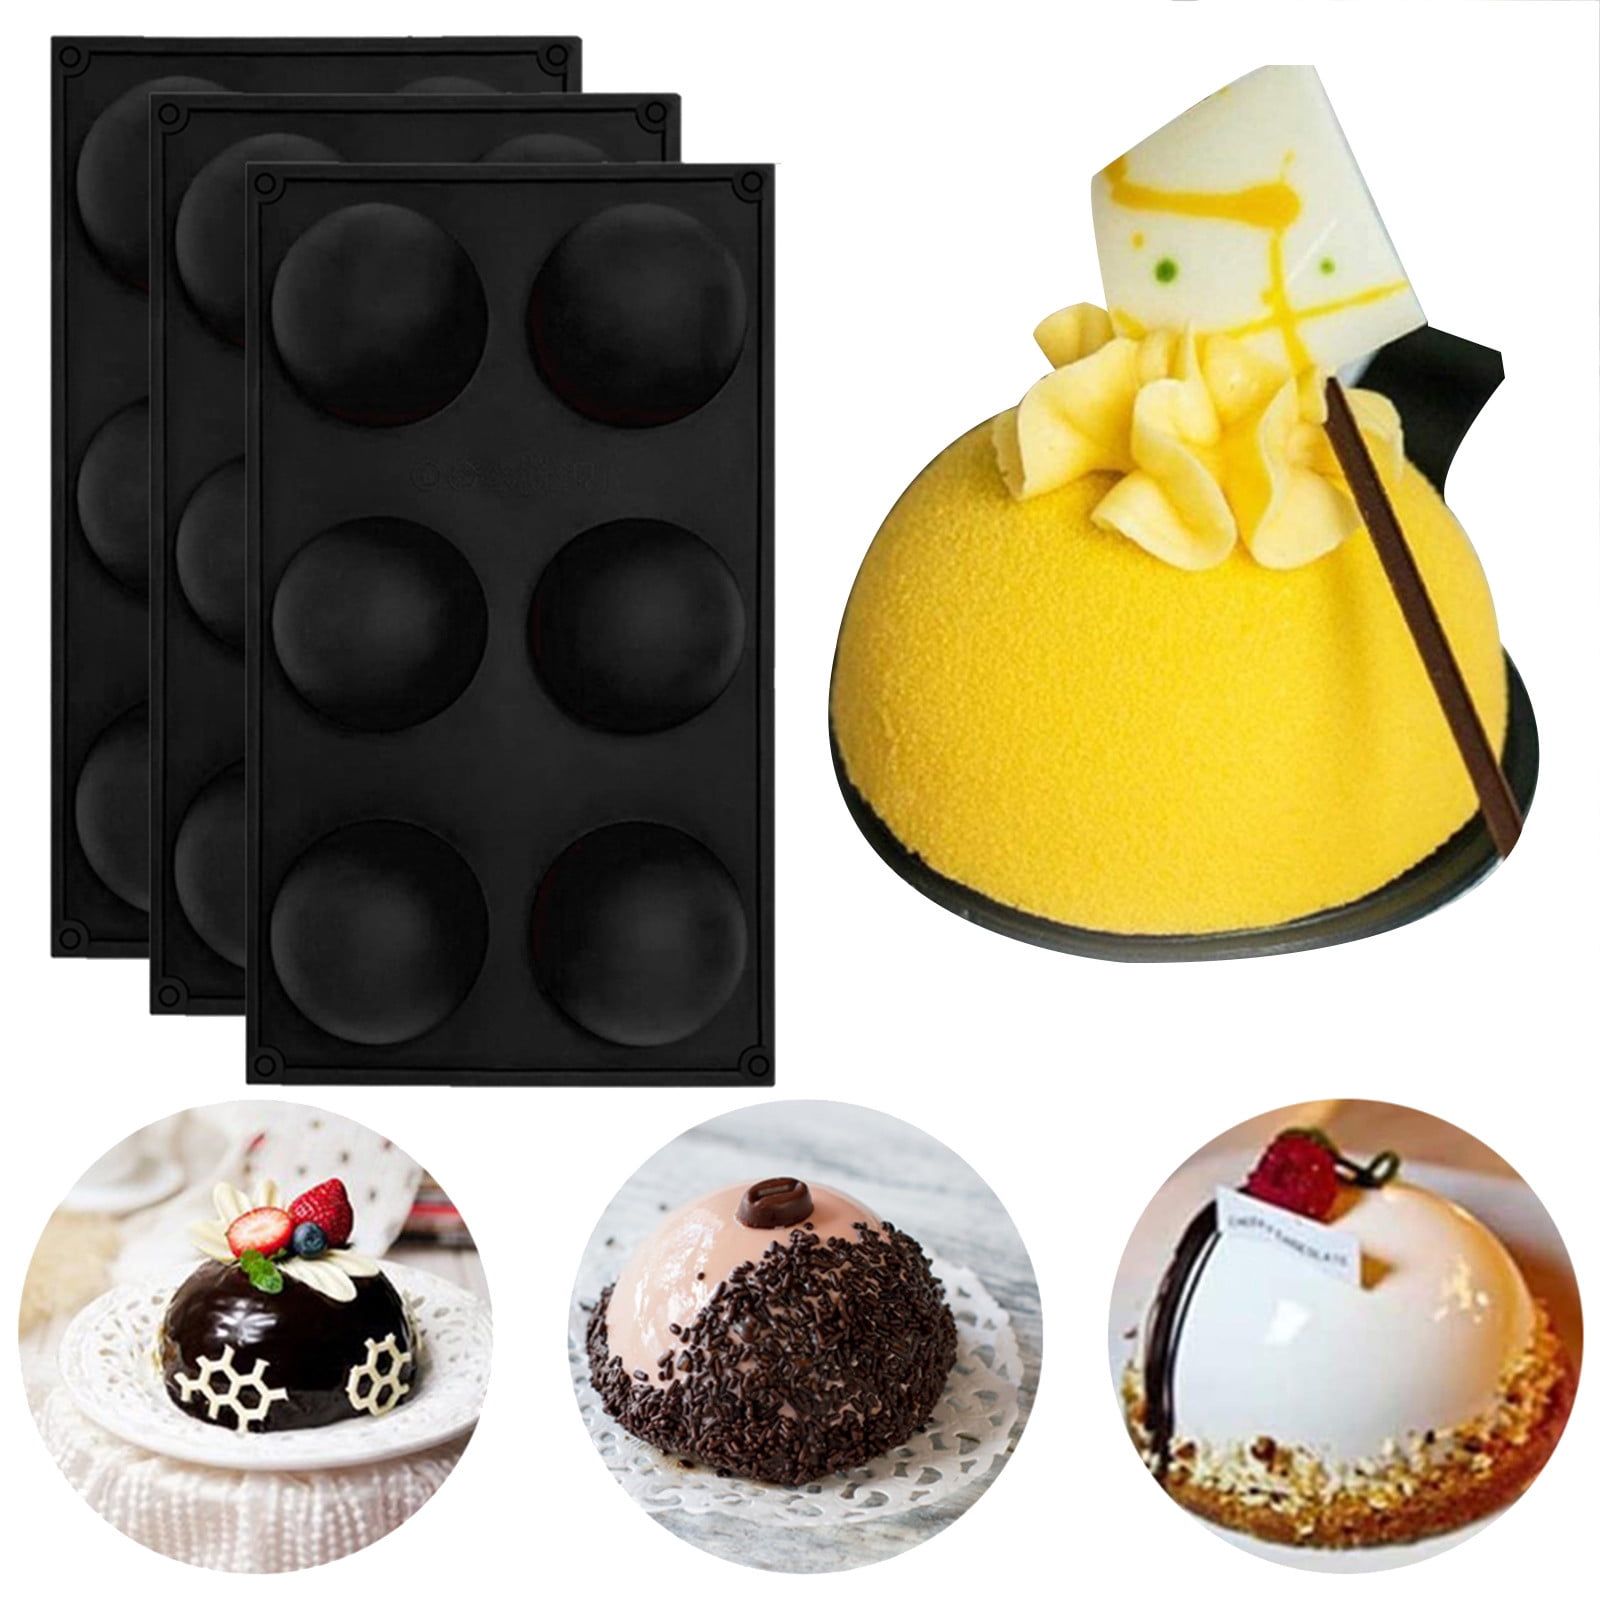 Silicone Cake Mold Muffin Chocolate Cookies Baking Moulds Pan Chick Egg Mold 